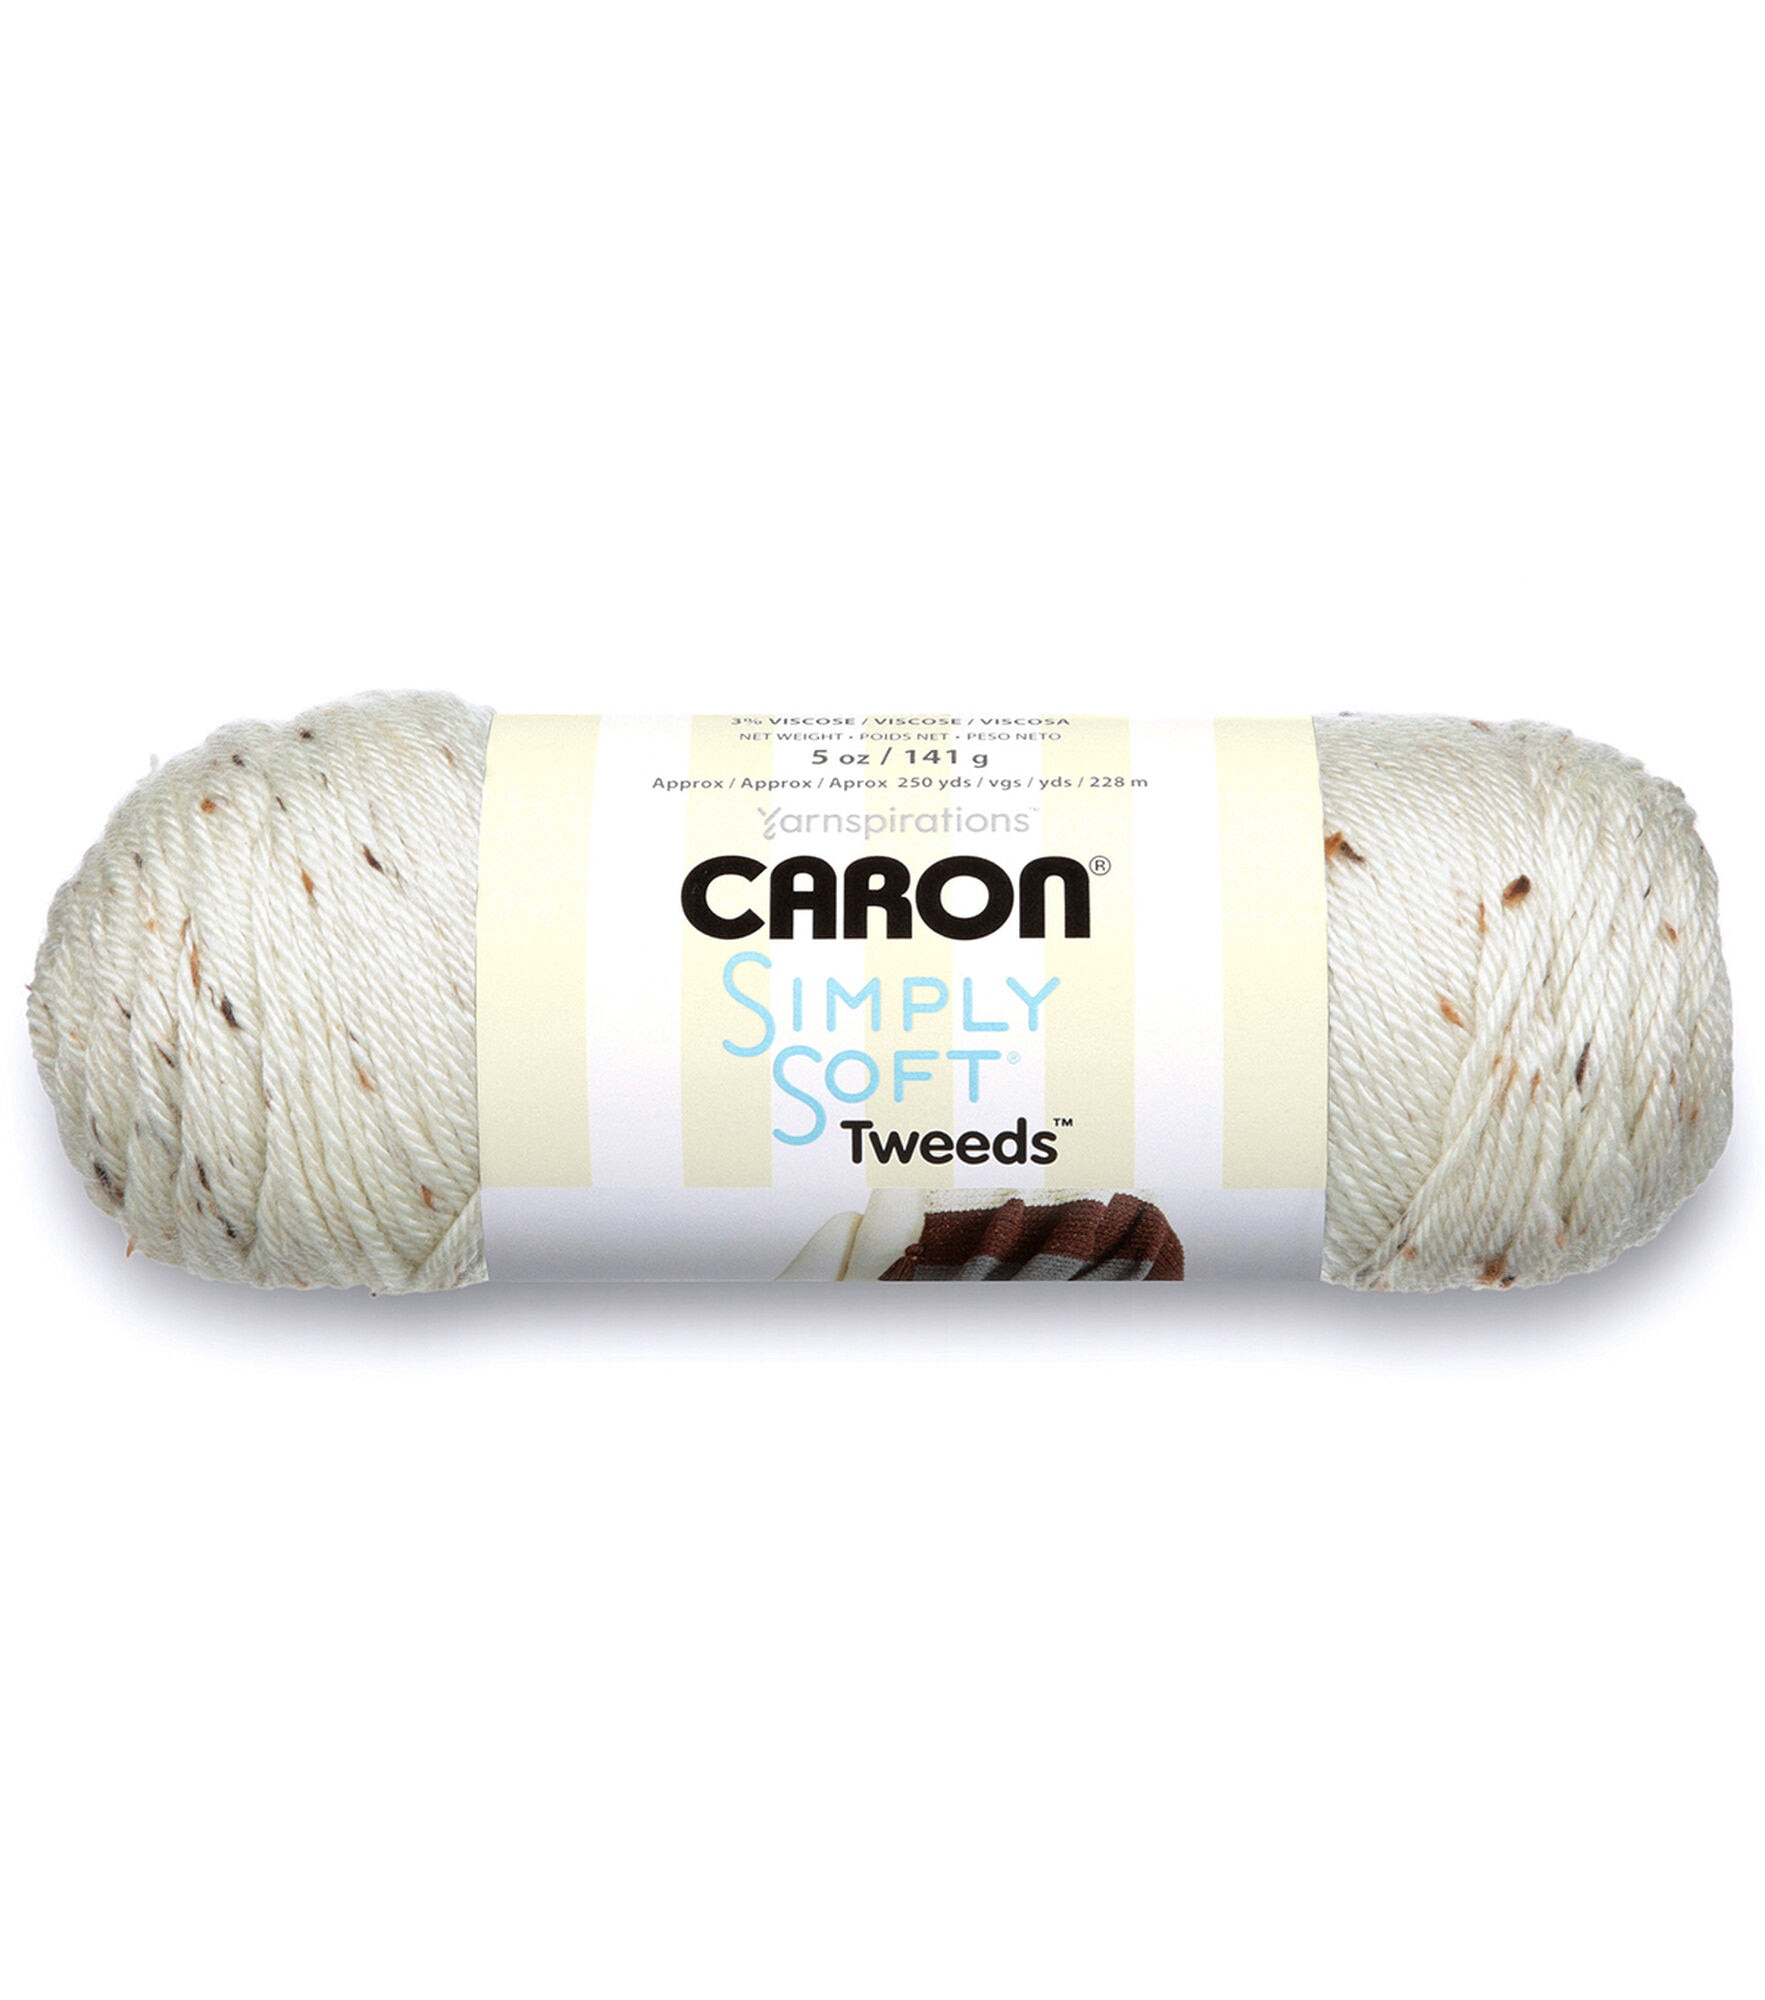 Caron Simply Soft Yarn in Canada, Free Shipping at